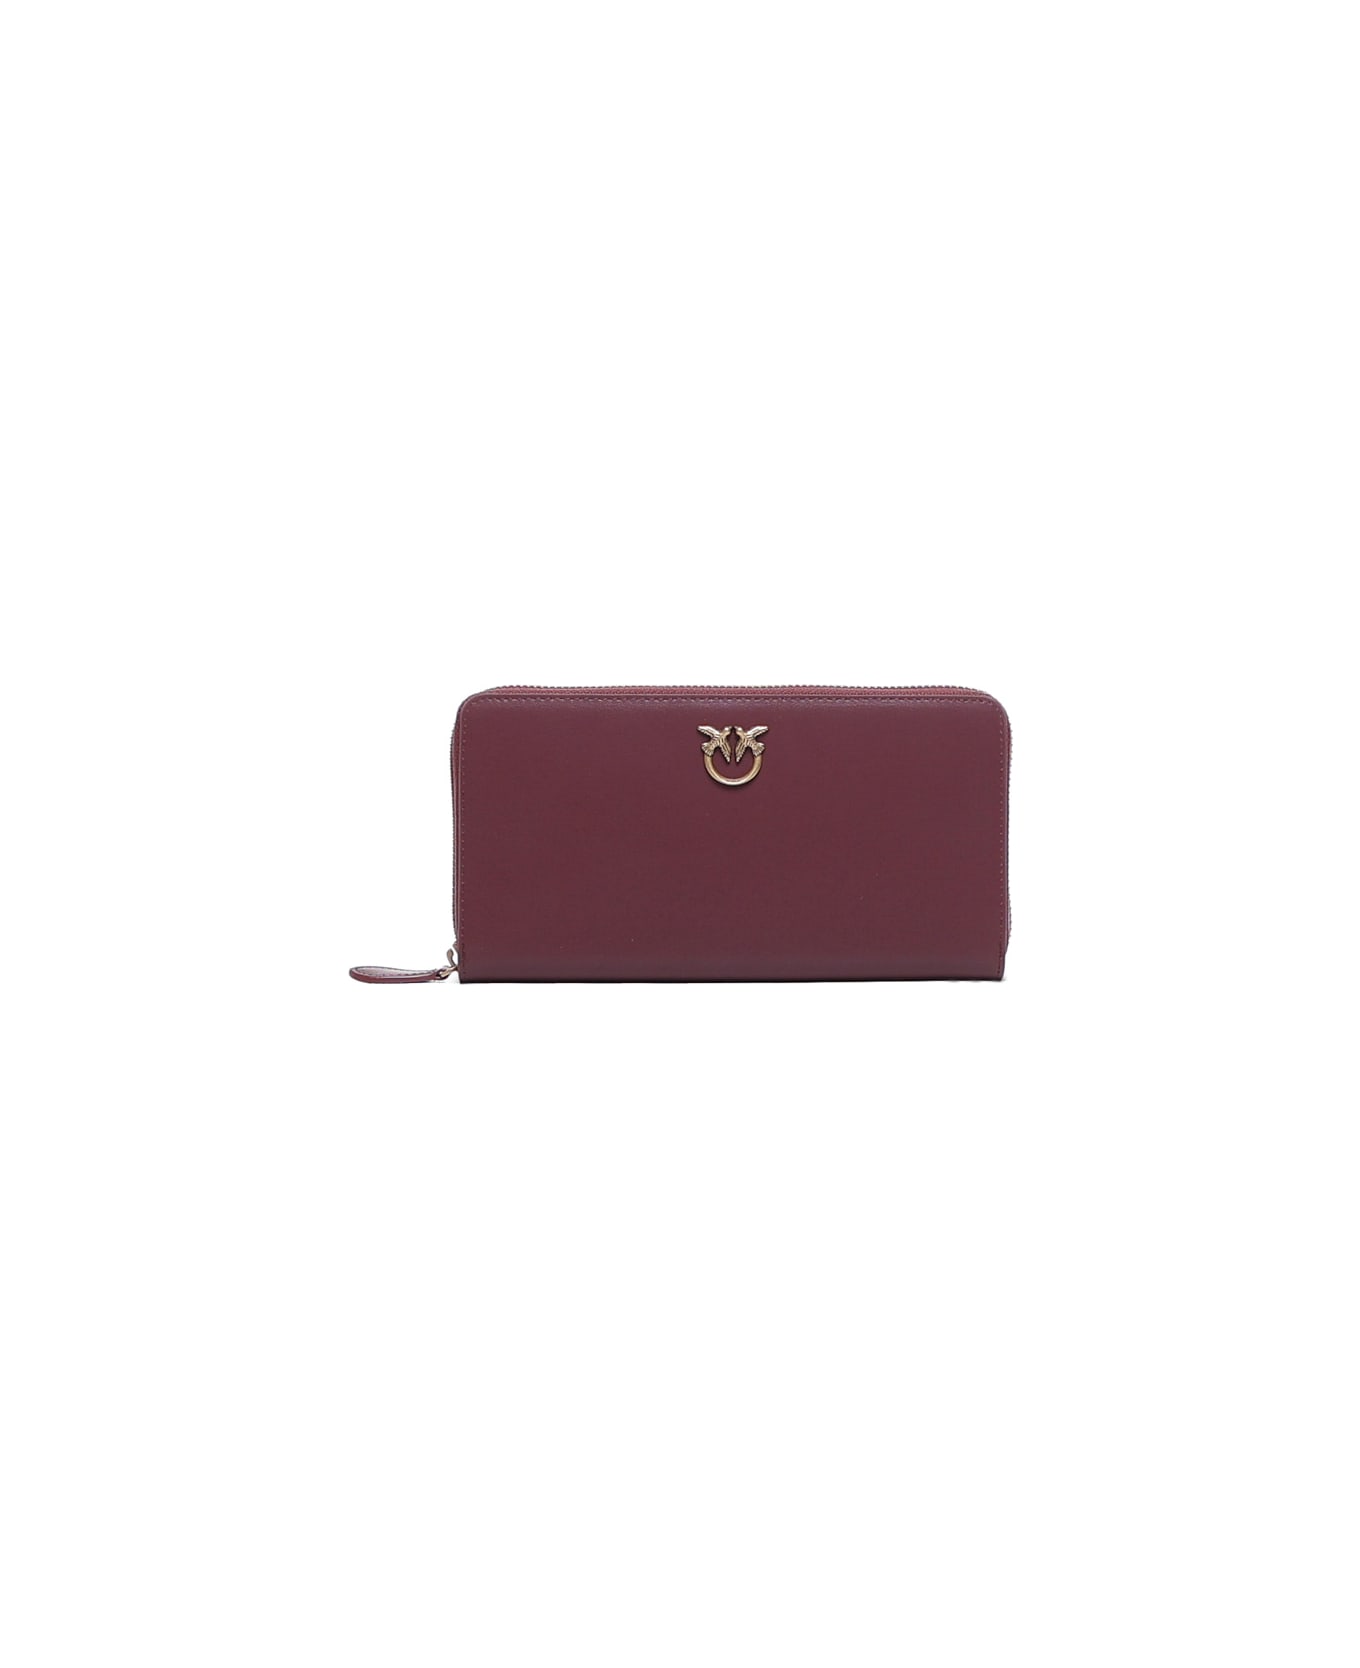 Pinko Ryder Leather Wallet - RIBES INTENSO  ANTIQUE GOLD クラッチバッグ